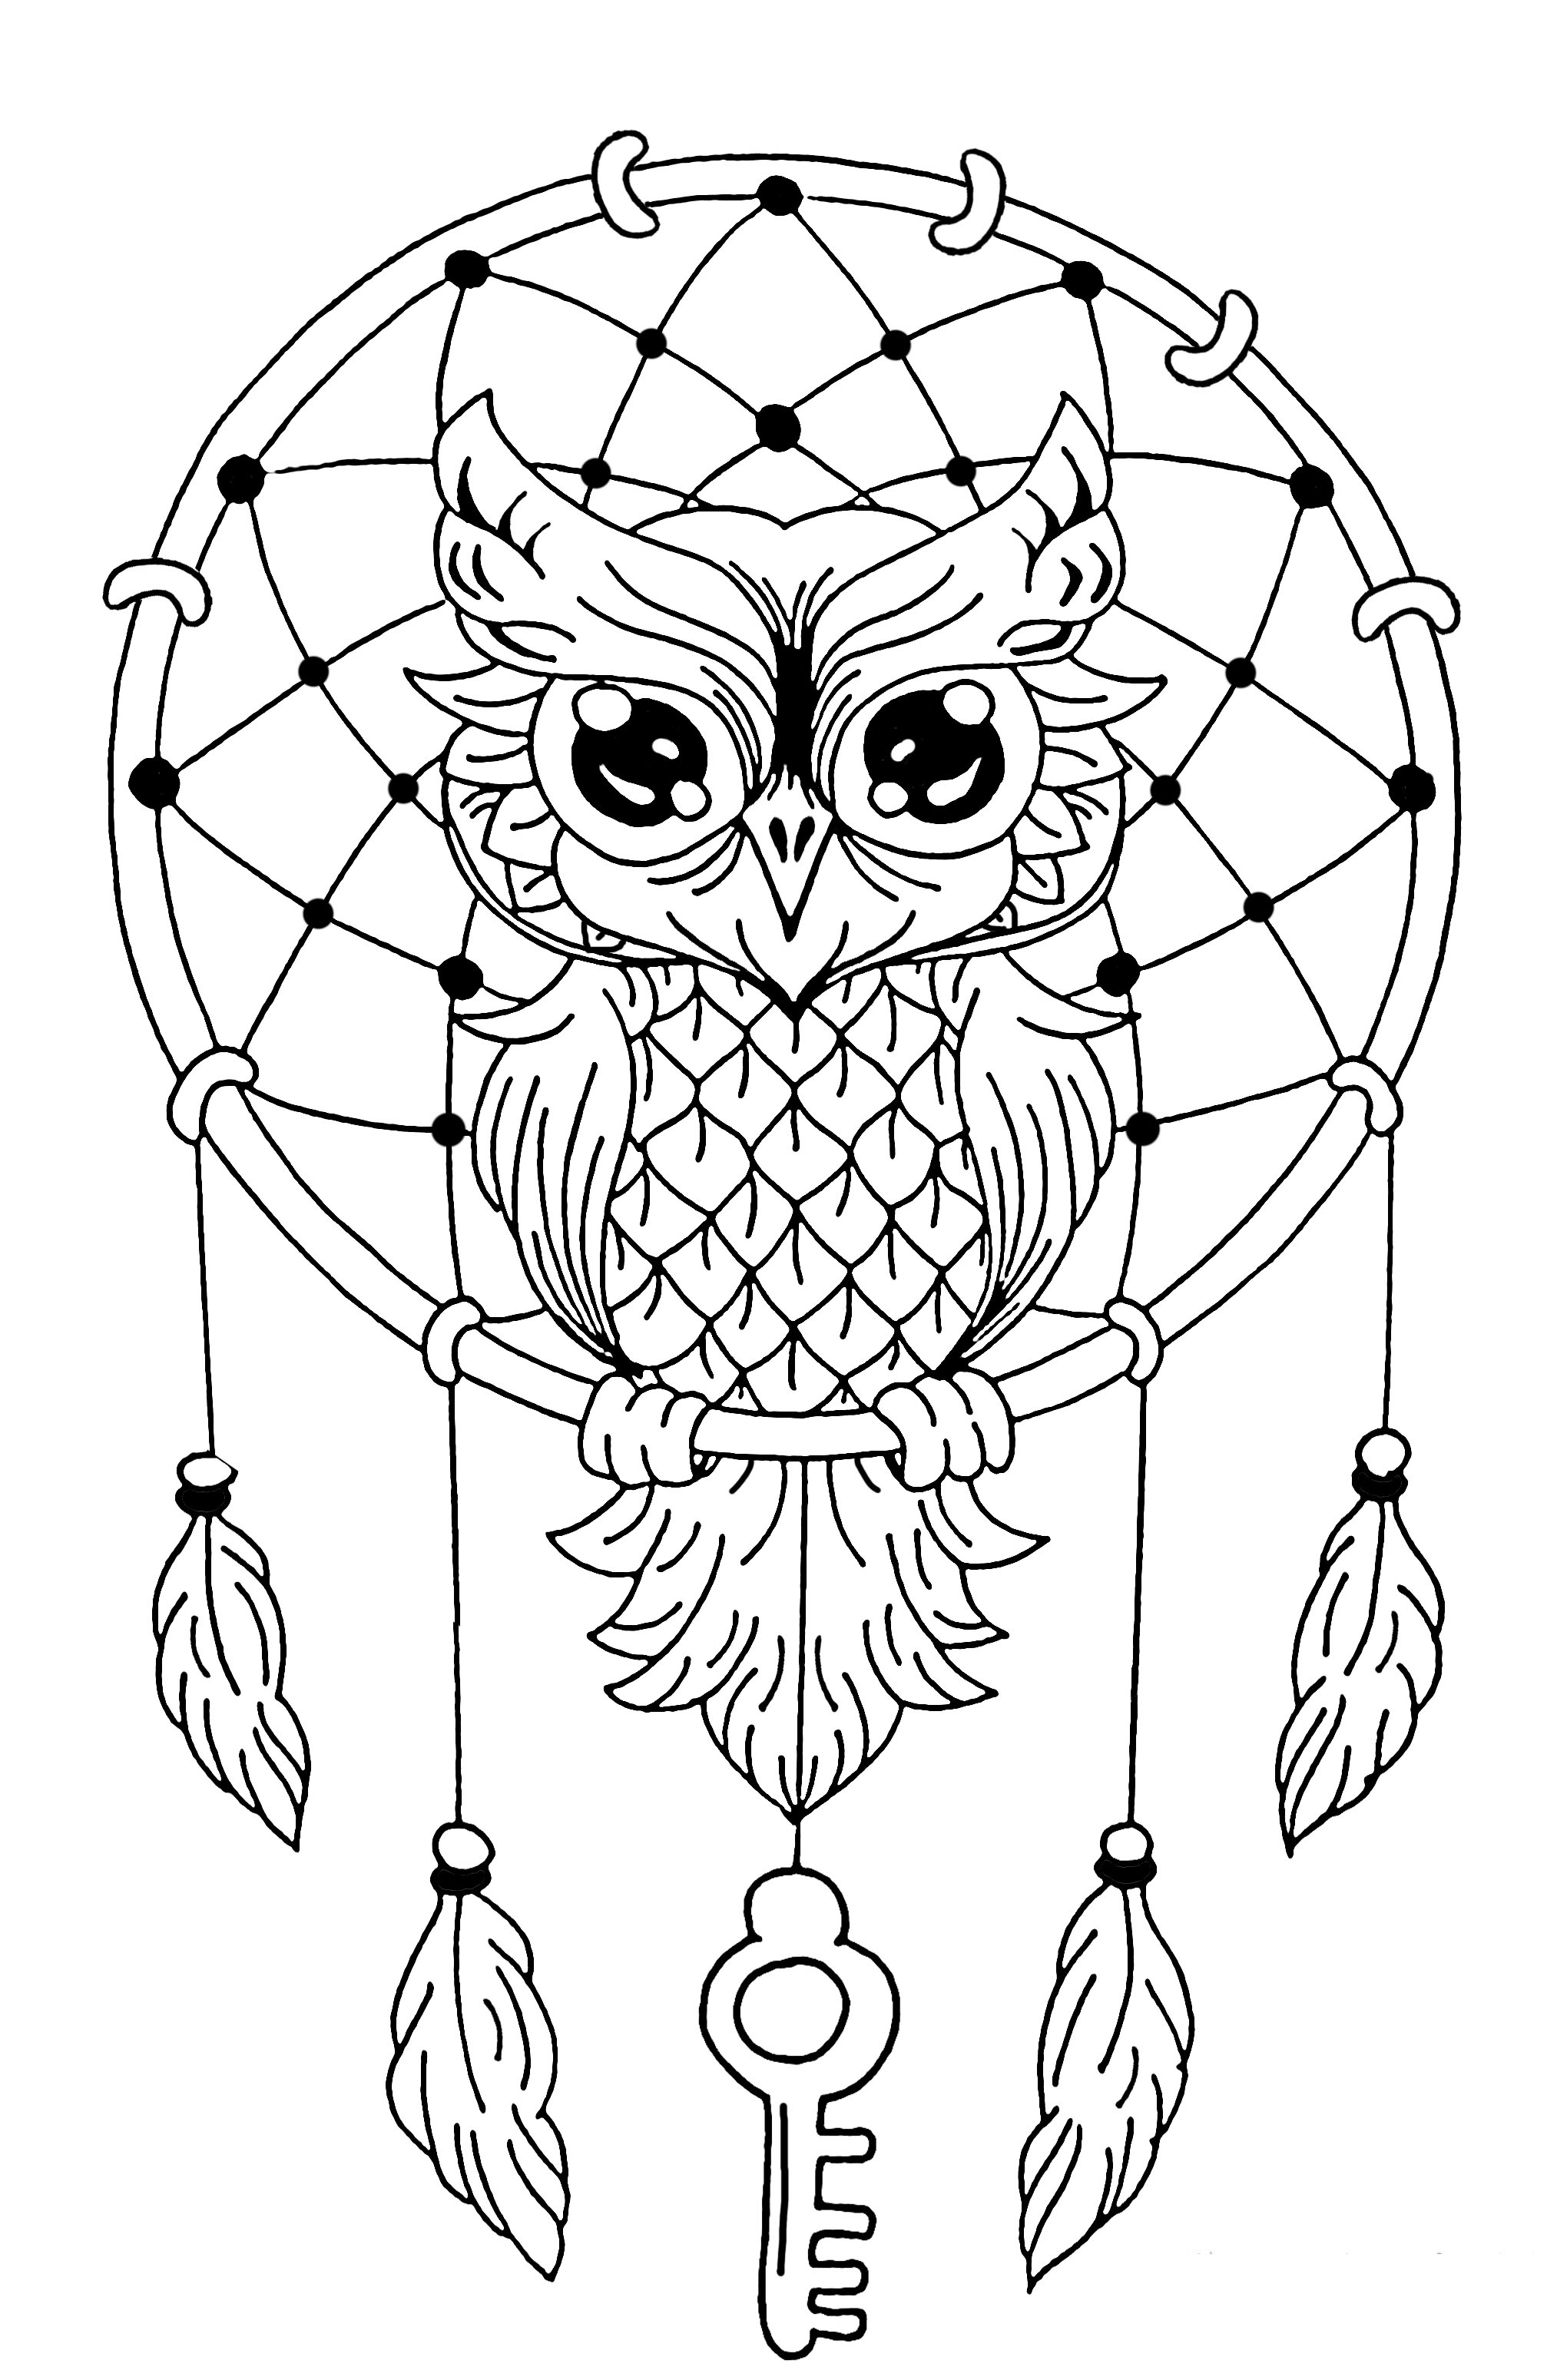 Download Dream Catcher Coloring Pages - Best Coloring Pages For Kids